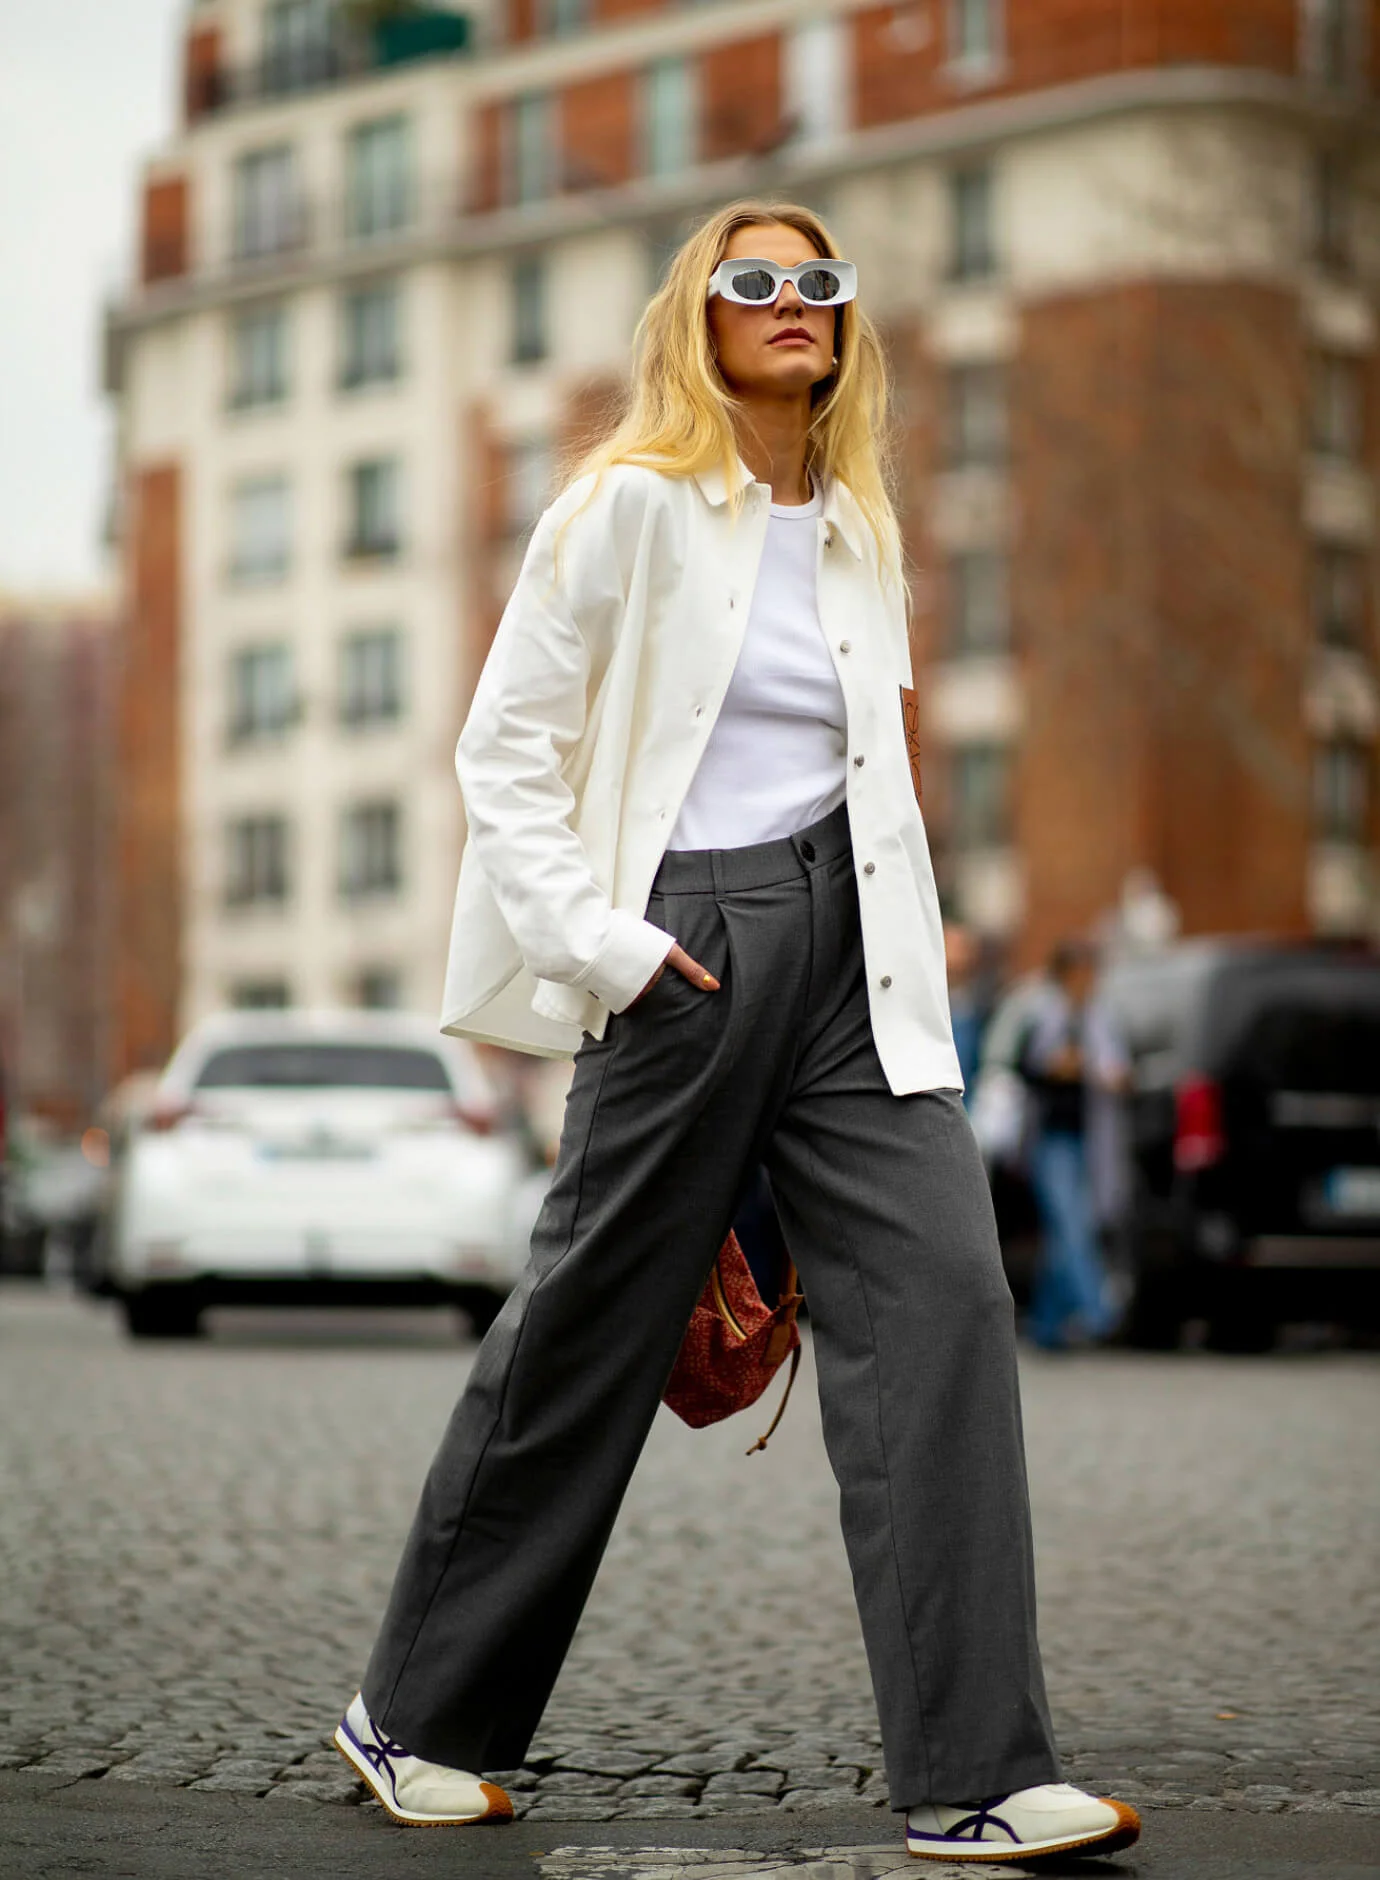 Dress Pants with Low Top Sneakers Dressy Spring Outfits For Women